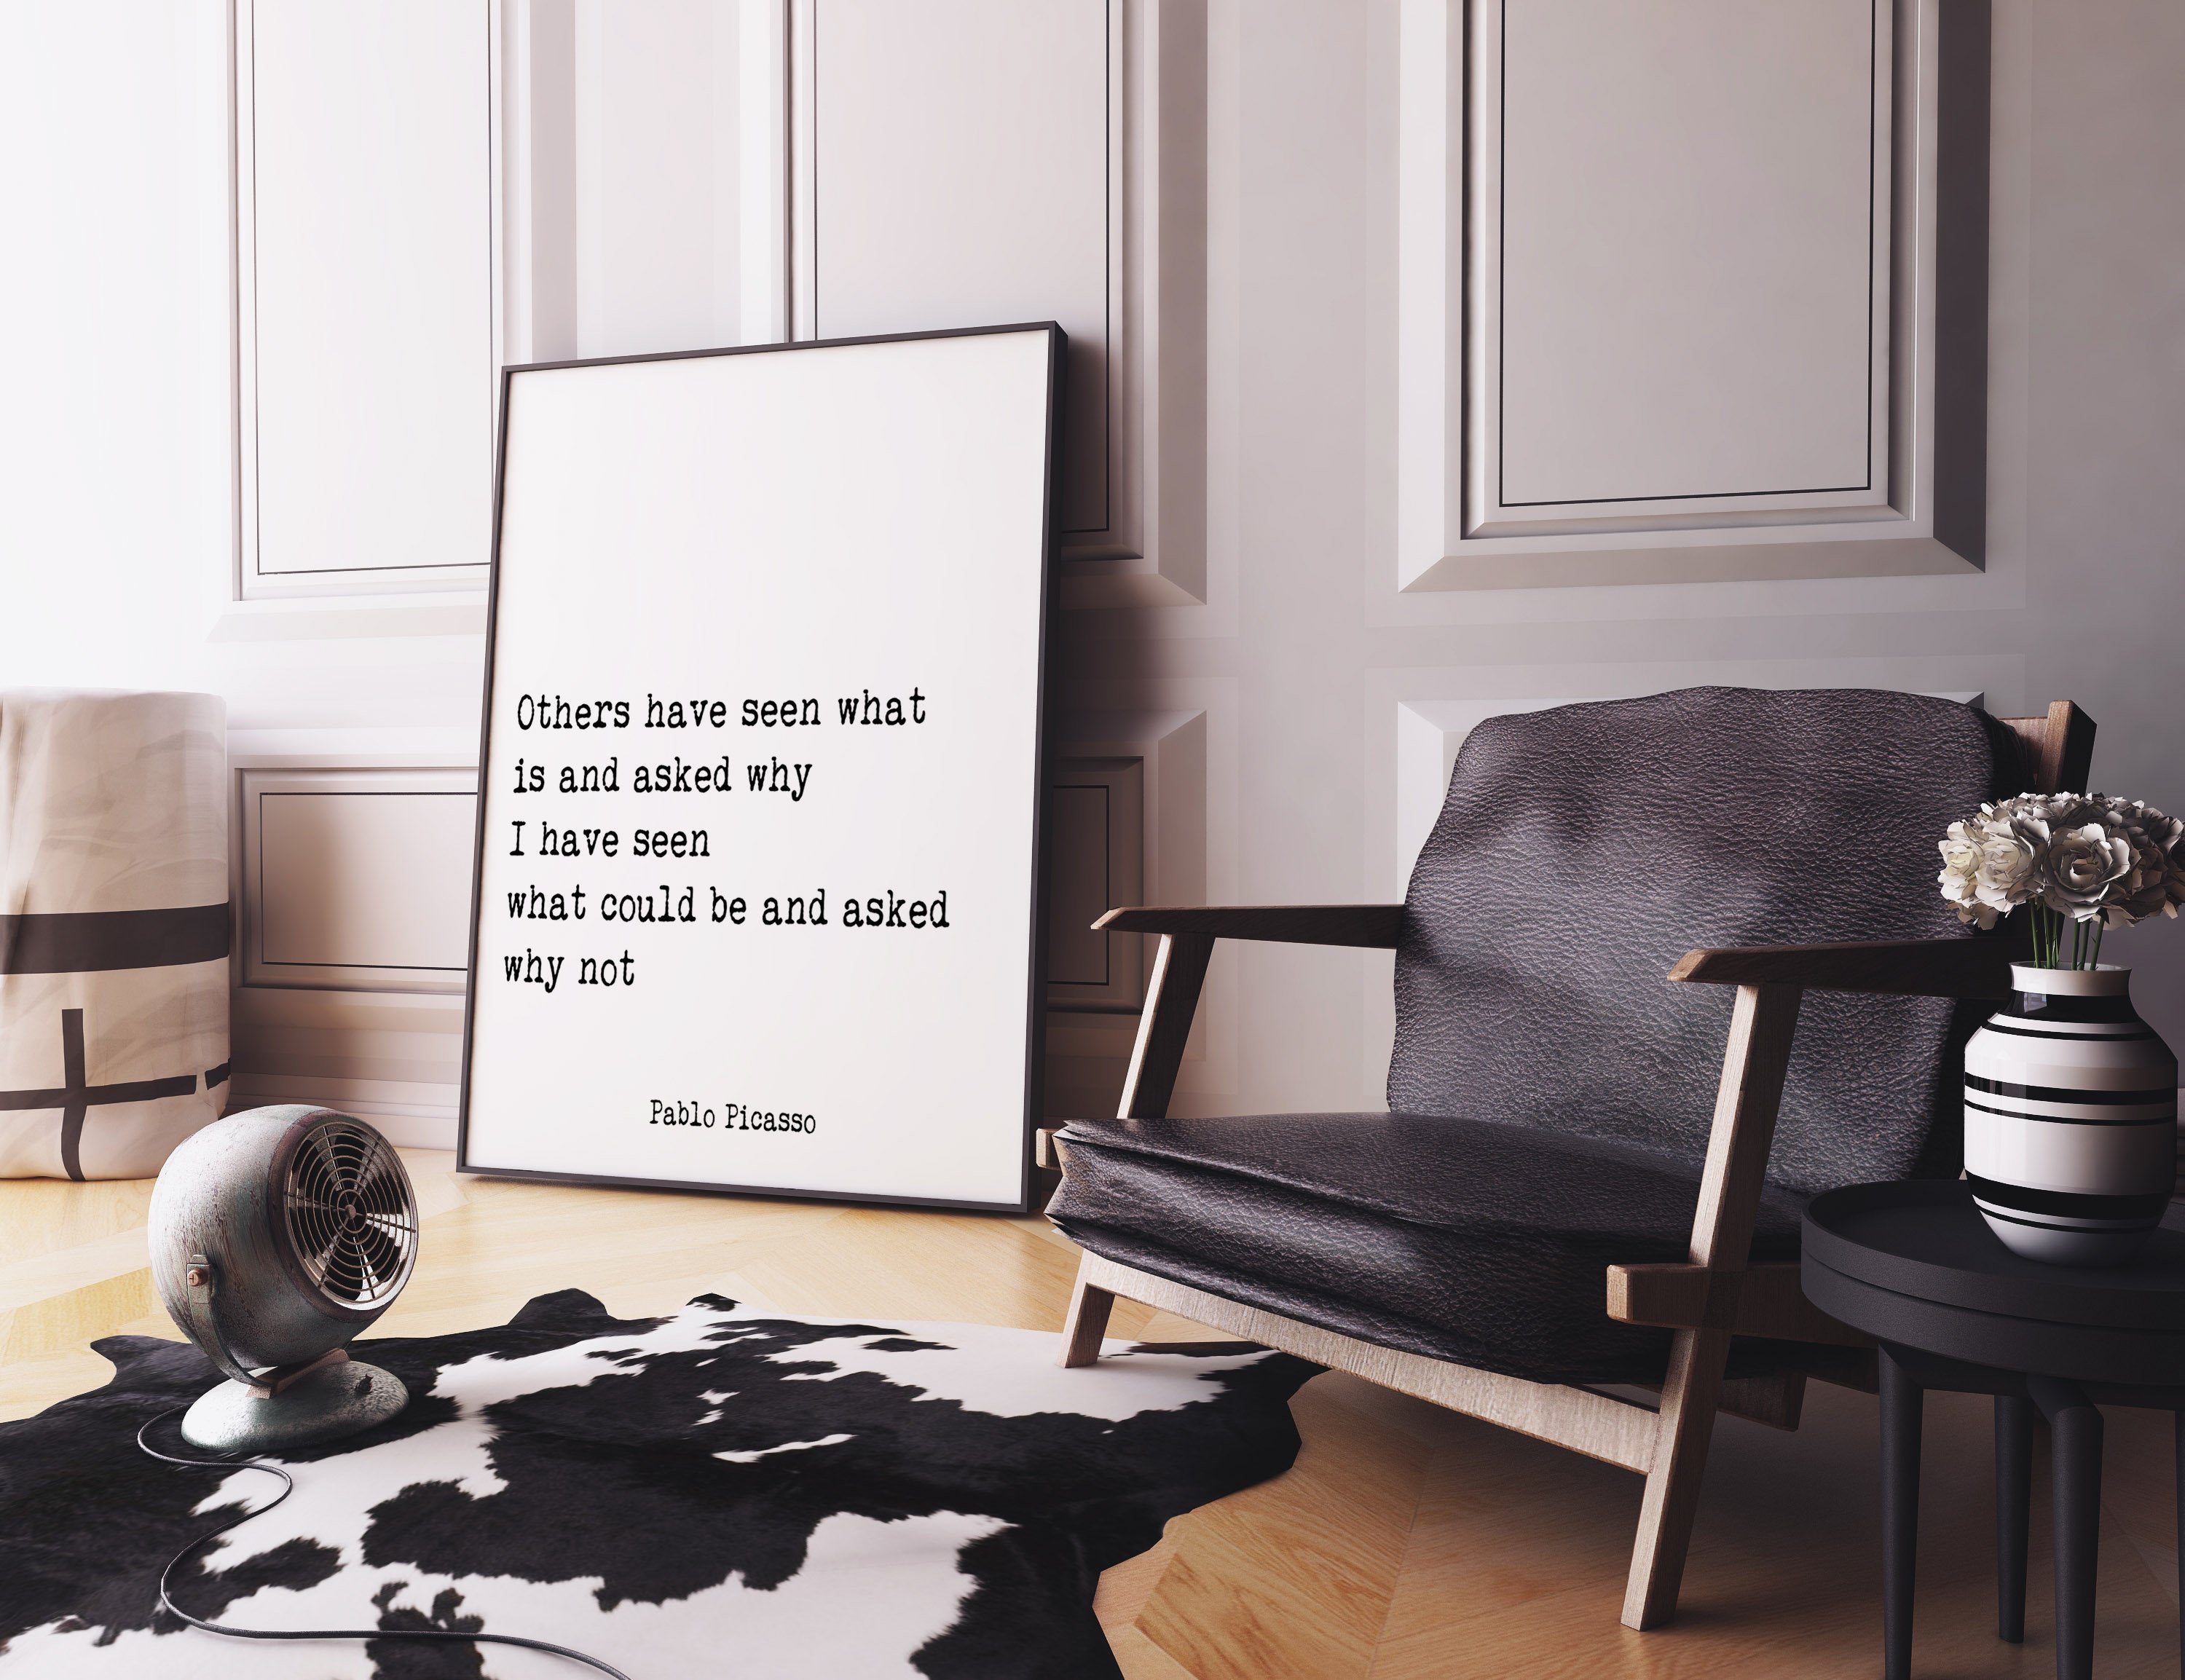 Pablo Picasso Quote Print, Others have seen what is and asked why, black and white print, home decor Unframed - BookQuoteDecor